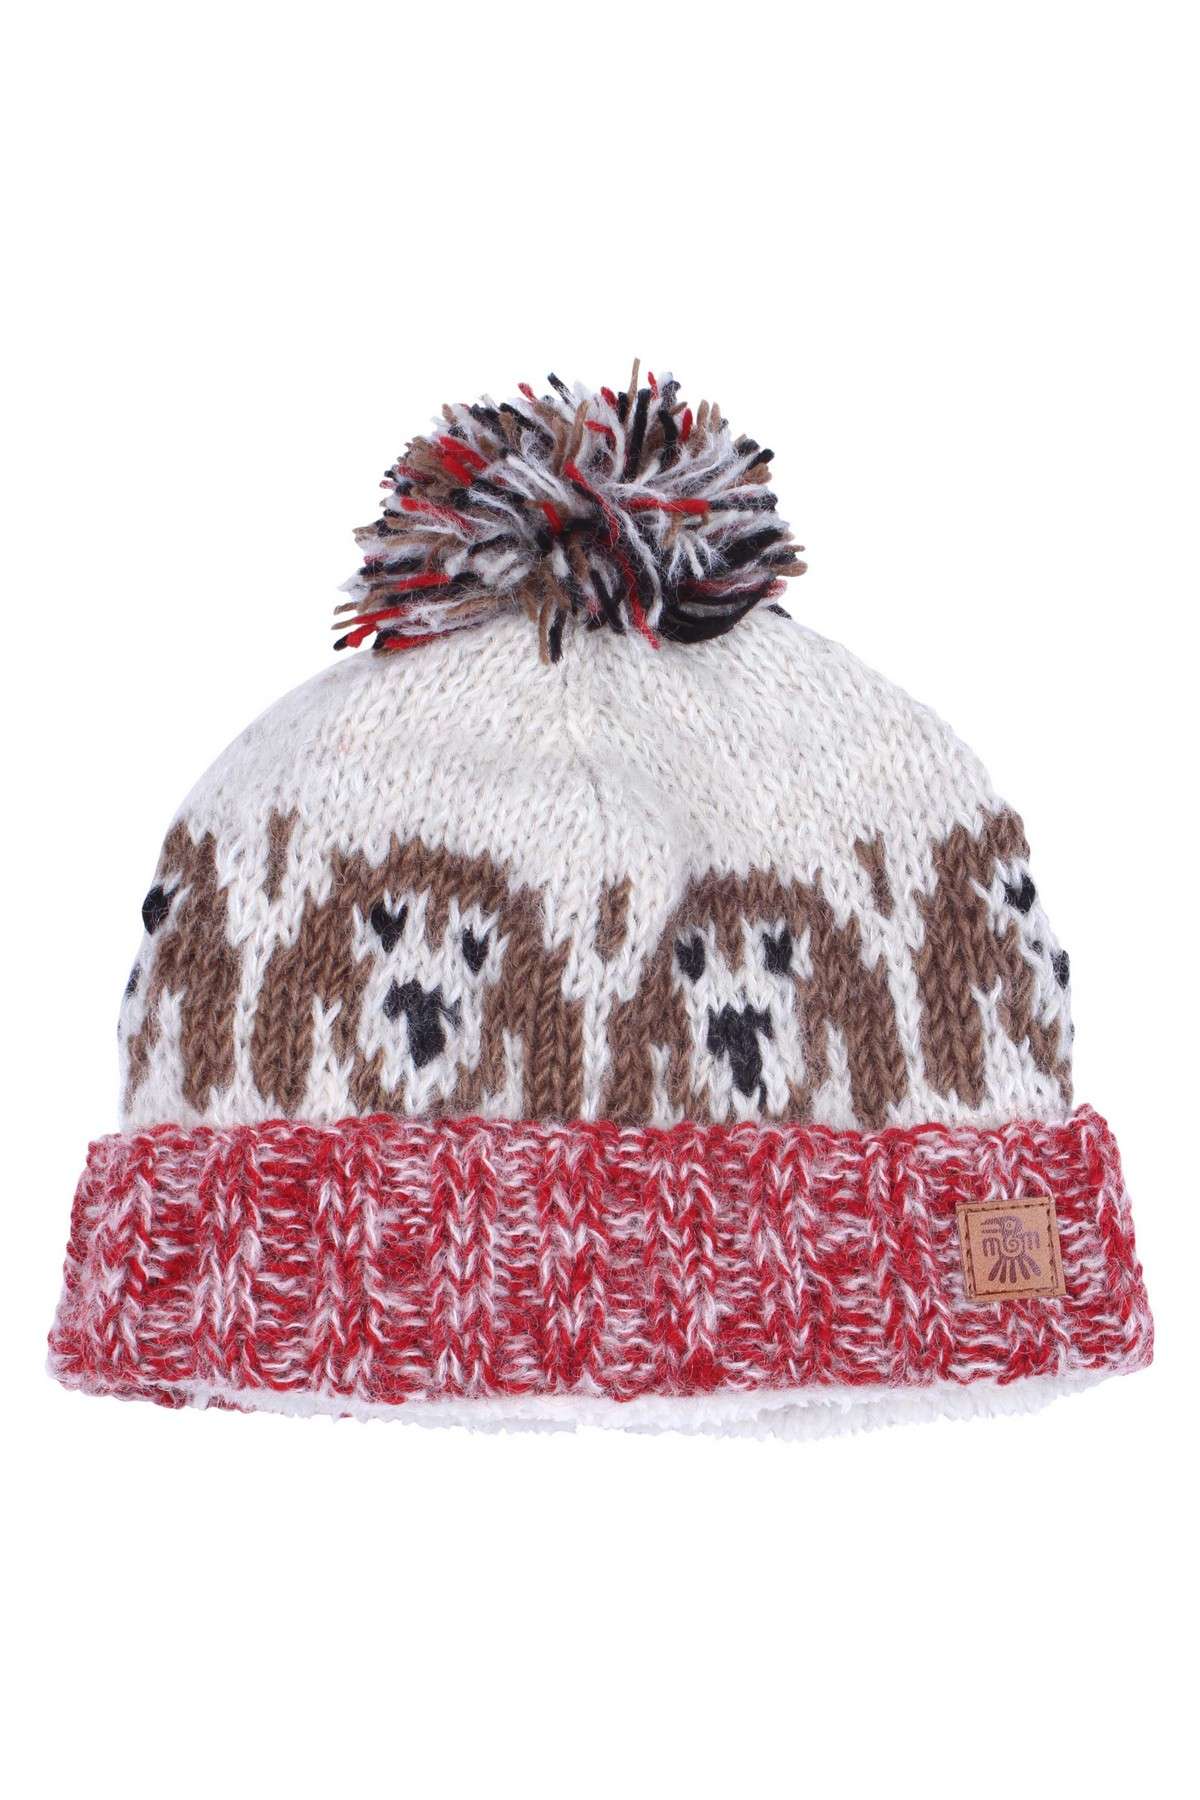 hound bobble red 3 <p style="text-align: center"><strong><span style="font-size: 18pt">Hazy Hound Bobble Hat, Hand Knitted</span></strong></p> <p style="text-align: center"><span style="font-size: 14pt">Our newest Hazy mohair blend Bobble hat. Perfect for those long dog walks.</span></p> <p style="text-align: center"><span style="font-size: 14pt"> Sherpa fleece lined for extra comfiness!</span> <span style="font-size: 14pt">Women's hand knitted wool mohair blend  bobble hat, with hound dog patterns.</span></p> <p style="text-align: center"><span style="font-size: 14pt">Red, Brown, Oatmeal colours.</span></p> <p style="text-align: center"><span style="font-size: 14pt">Wool/Mohair blend</span> <span style="font-size: 14pt">Hand knitted</span> <span style="font-size: 14pt">Colours and patterns may vary slightly due to the handmade nature of this product. </span></p> <div class="row"> <div id="item_price" class="col-sm-12"> <p style="text-align: center"><span style="font-size: 14pt">No two items are exactly the same!</span></p> <p style="text-align: center"><span style="font-size: 14pt">Handwarmers and headband available in this pattern.</span></p> <p style="text-align: center"><span style="font-size: 14pt">All colours are represented as closely as possible, we cannot guarantee 100% accuracy.</span></p> <h1 style="text-align: center"><strong>FREE P&P</strong></h1> </div> </div>